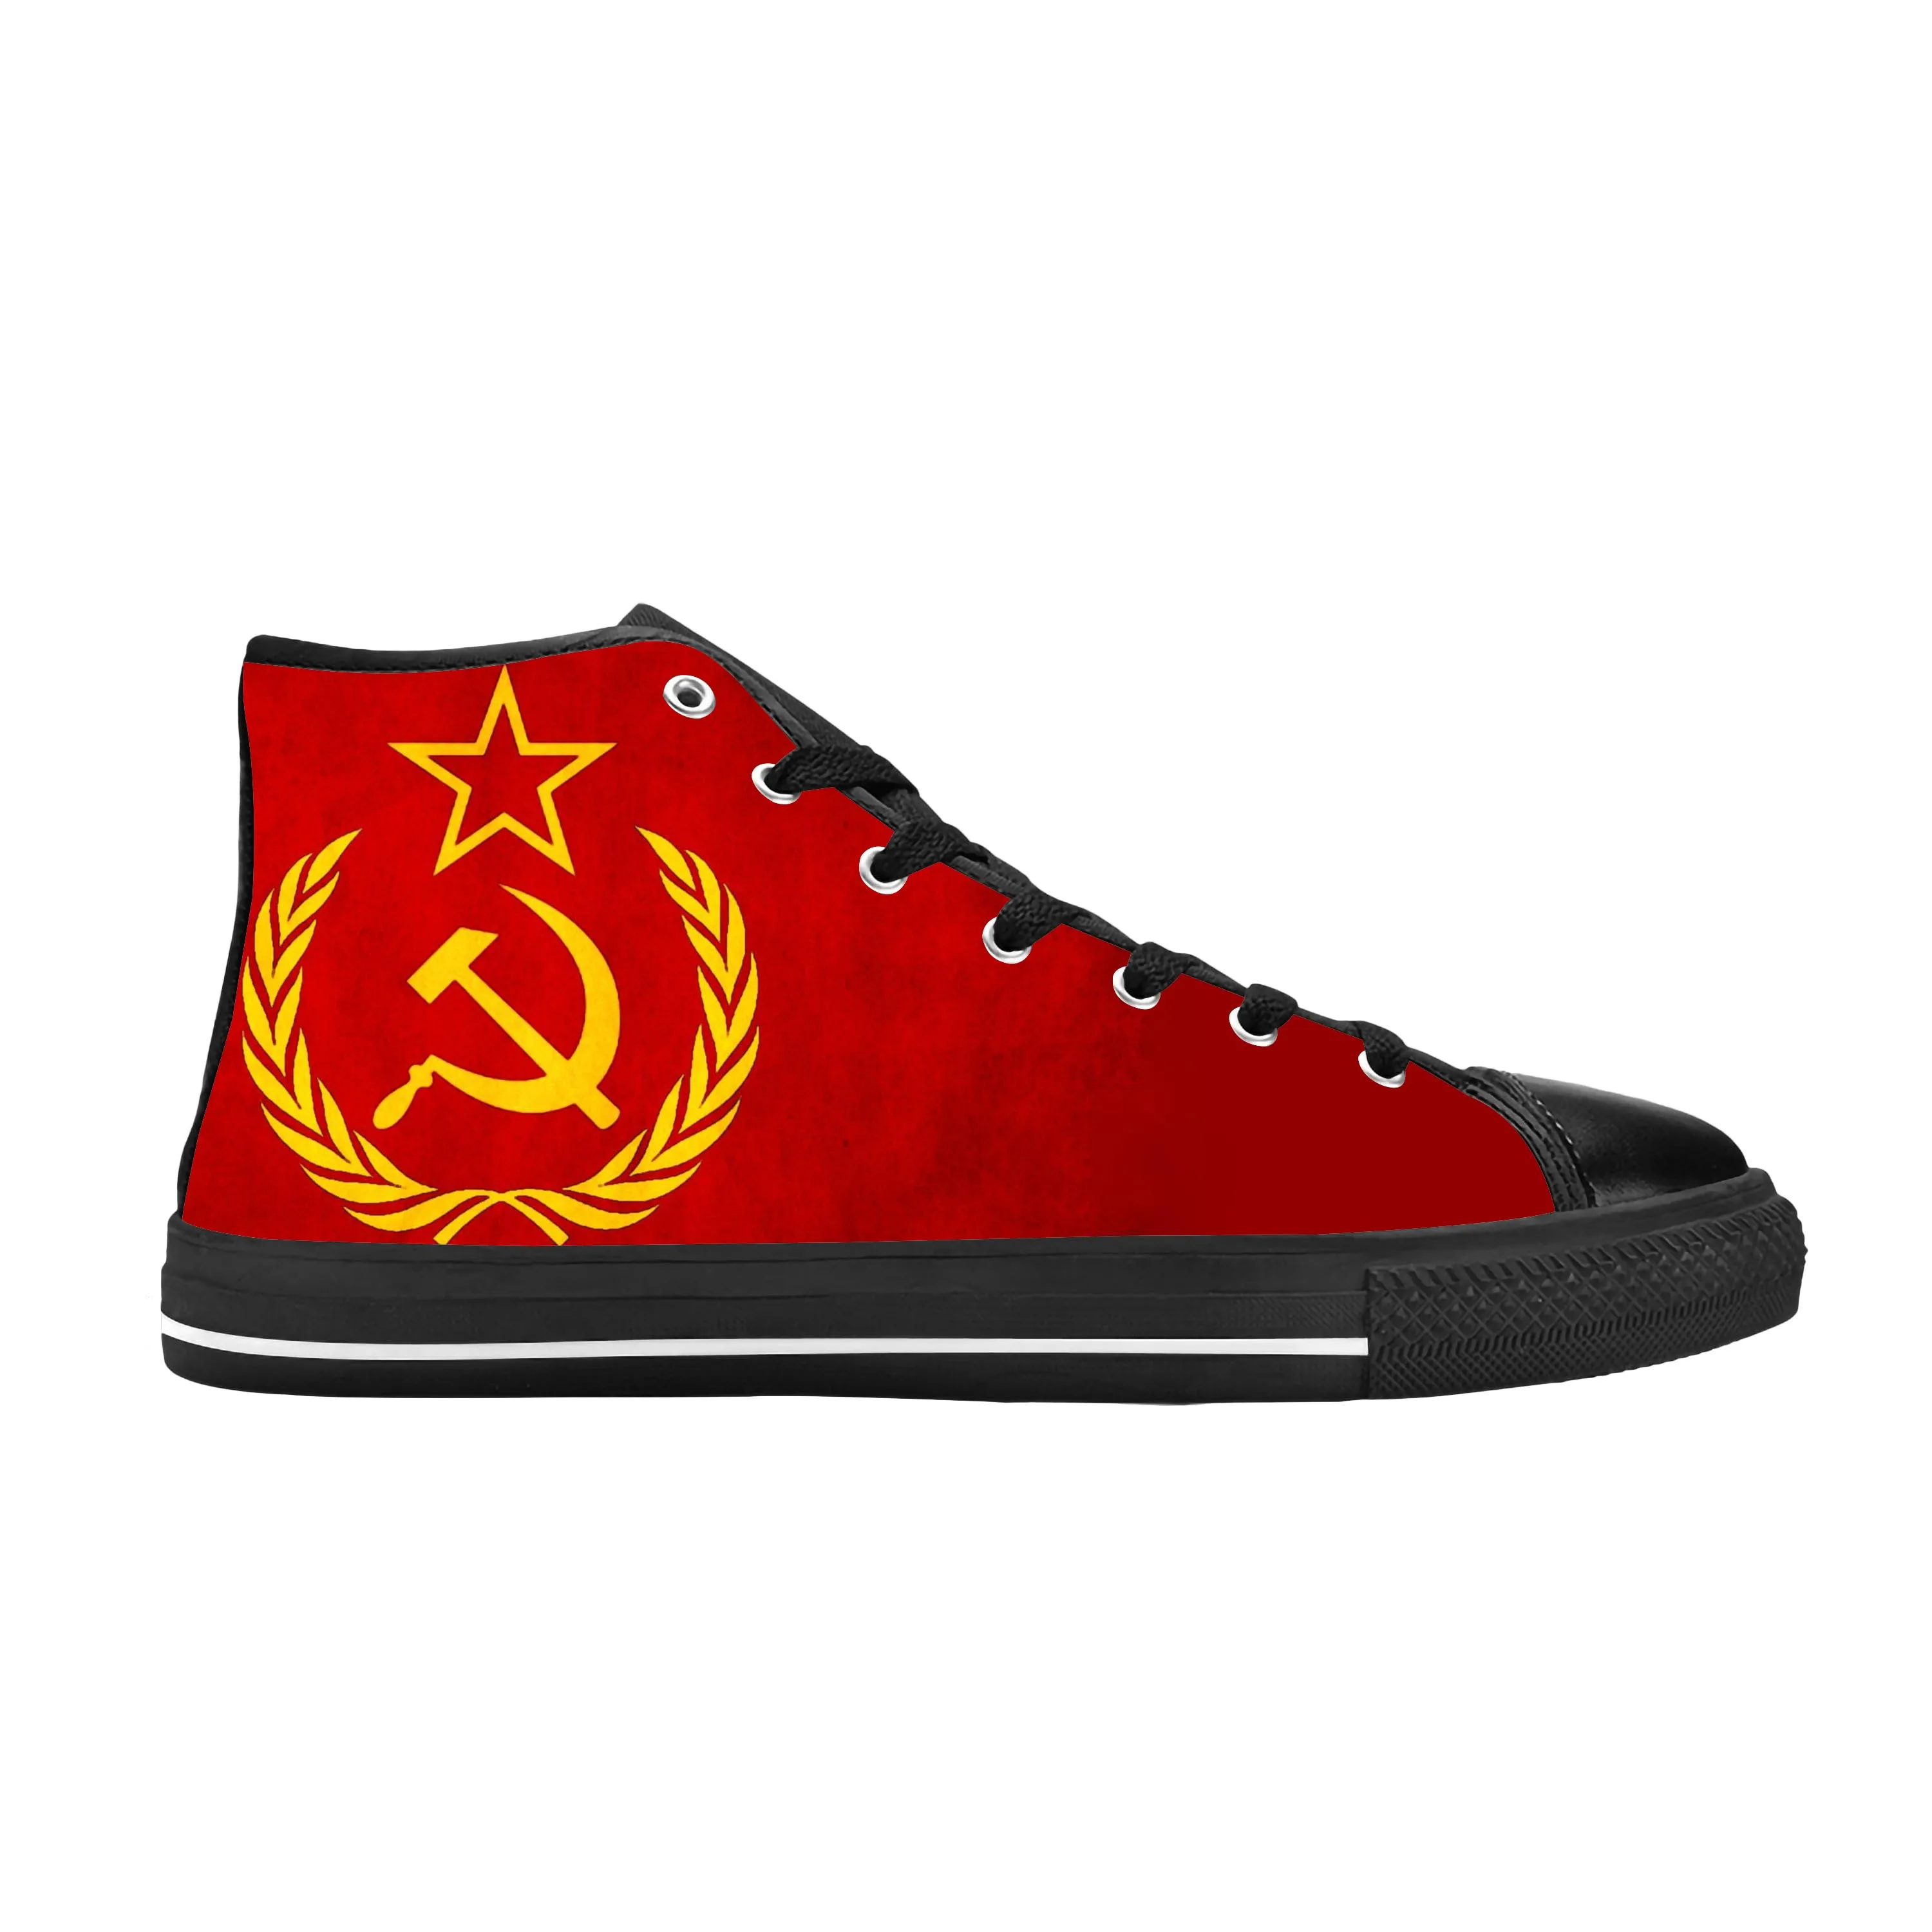 

Soviet Union CCCP USSR Flag Russia Hammer Sickle Casual Cloth Shoes High Top Comfortable Breathable 3D Print Men Women Sneakers